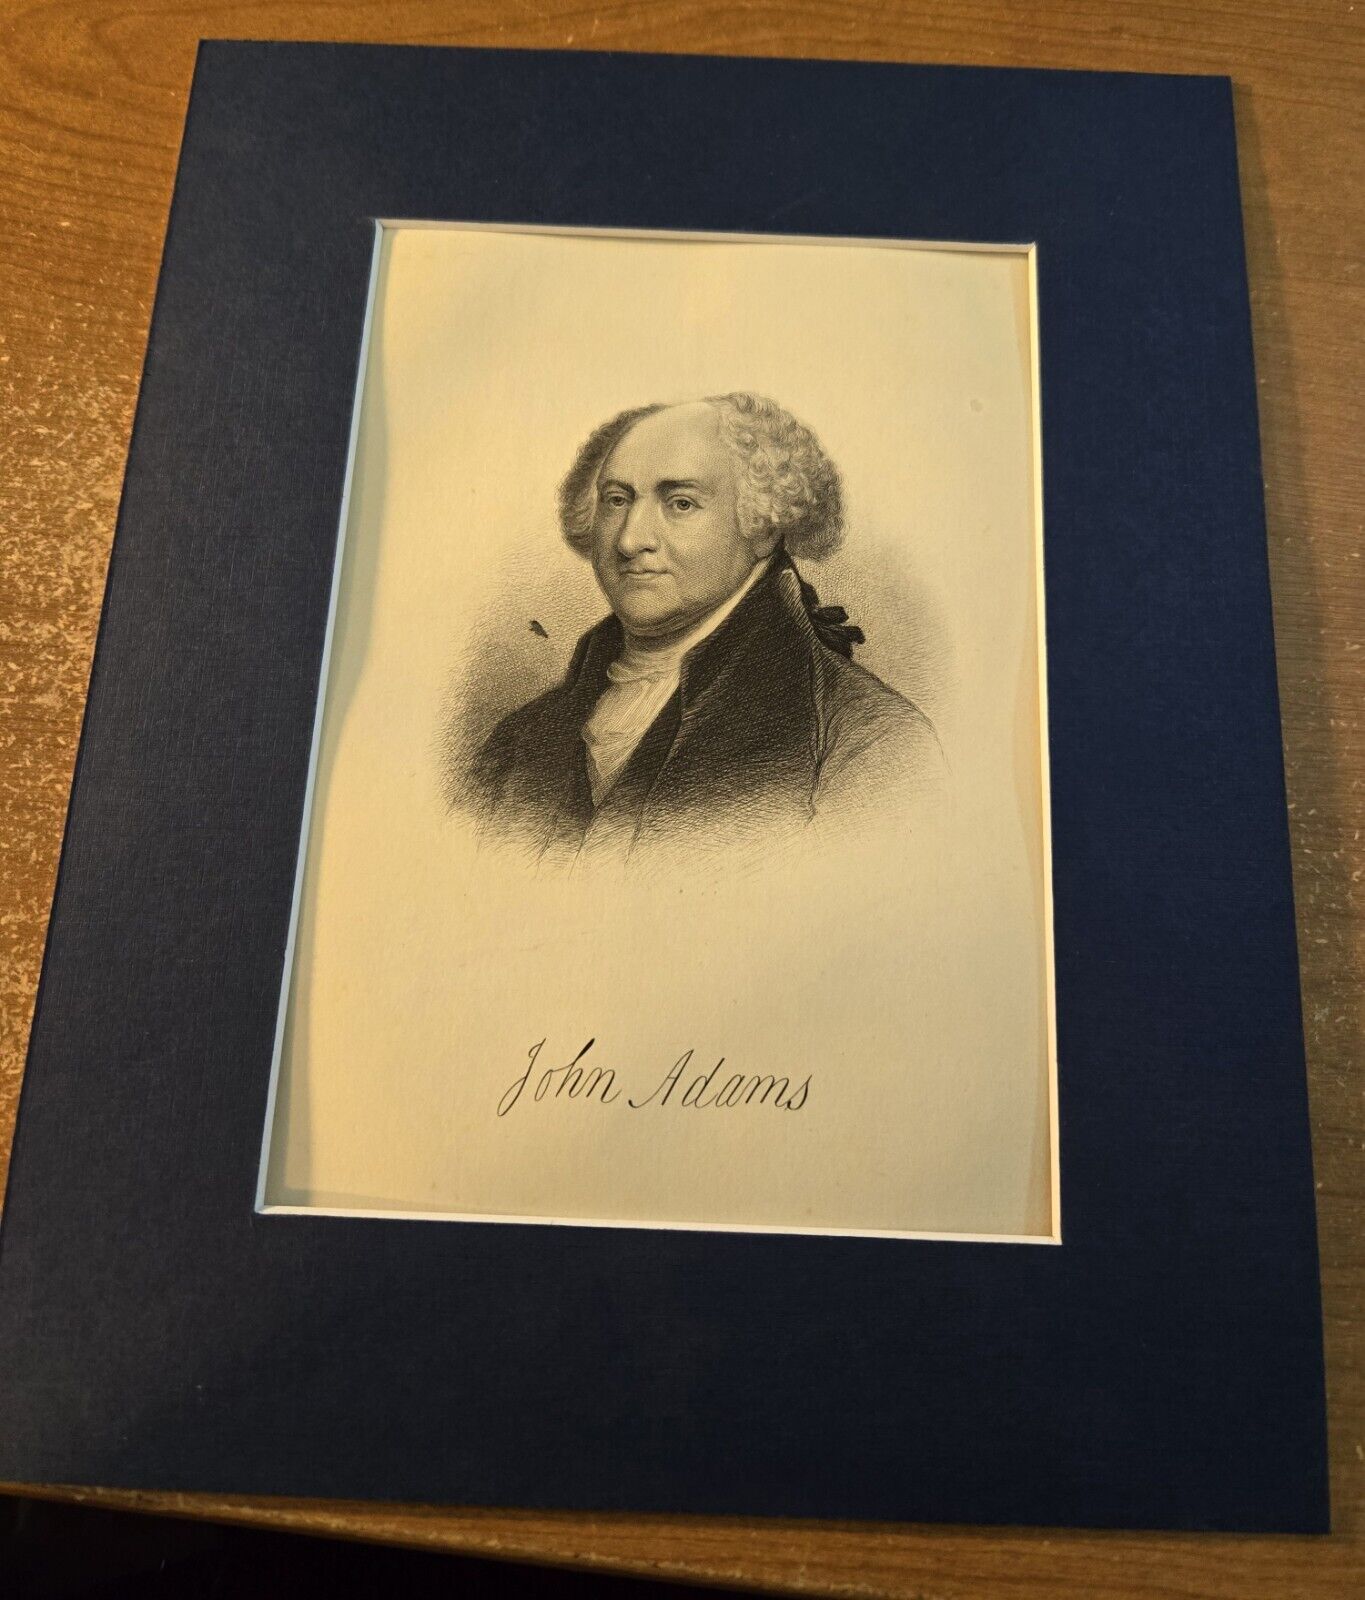 John Adams - Authentic 1889 Steel Engraving w/Signature - Matted